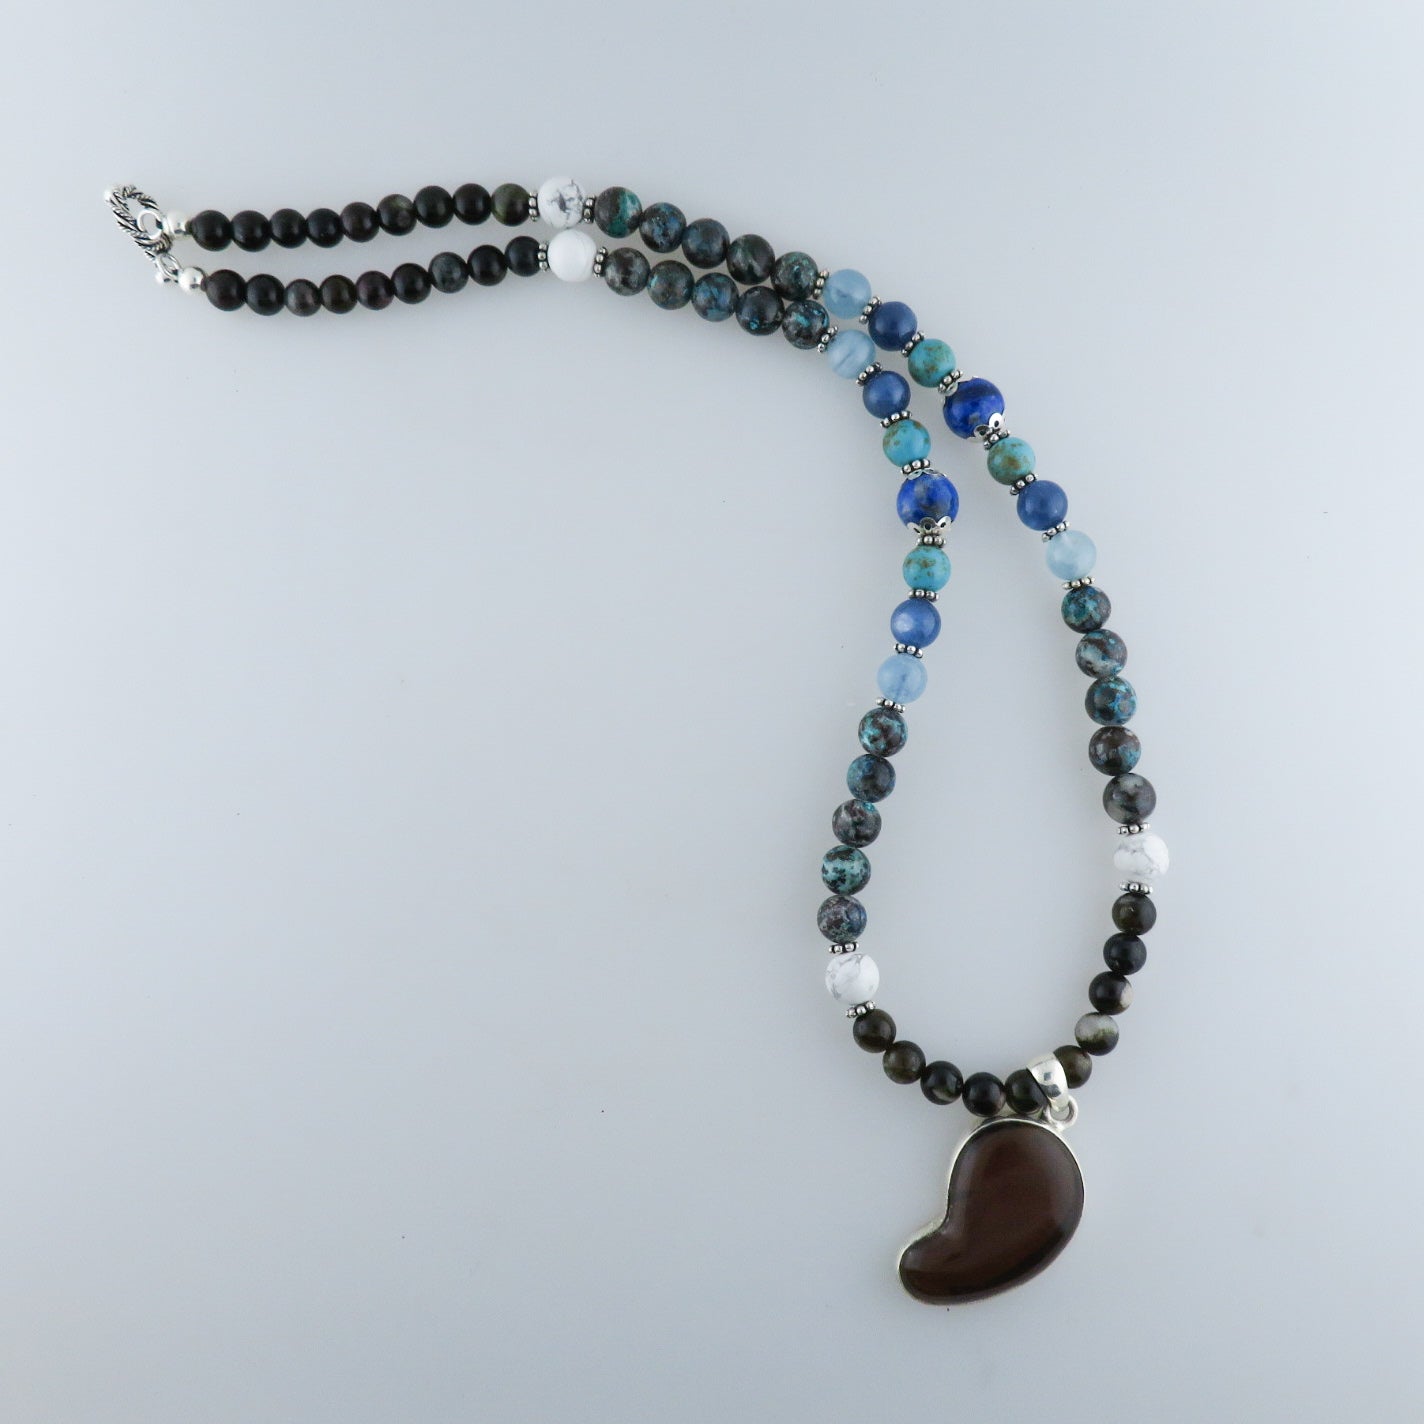 Amber Necklace with Chrysocolla, Aquamarine, Lapis Lazuli, Turquoise, Kyanite and Silver Beads.with Lava and Silver Beads